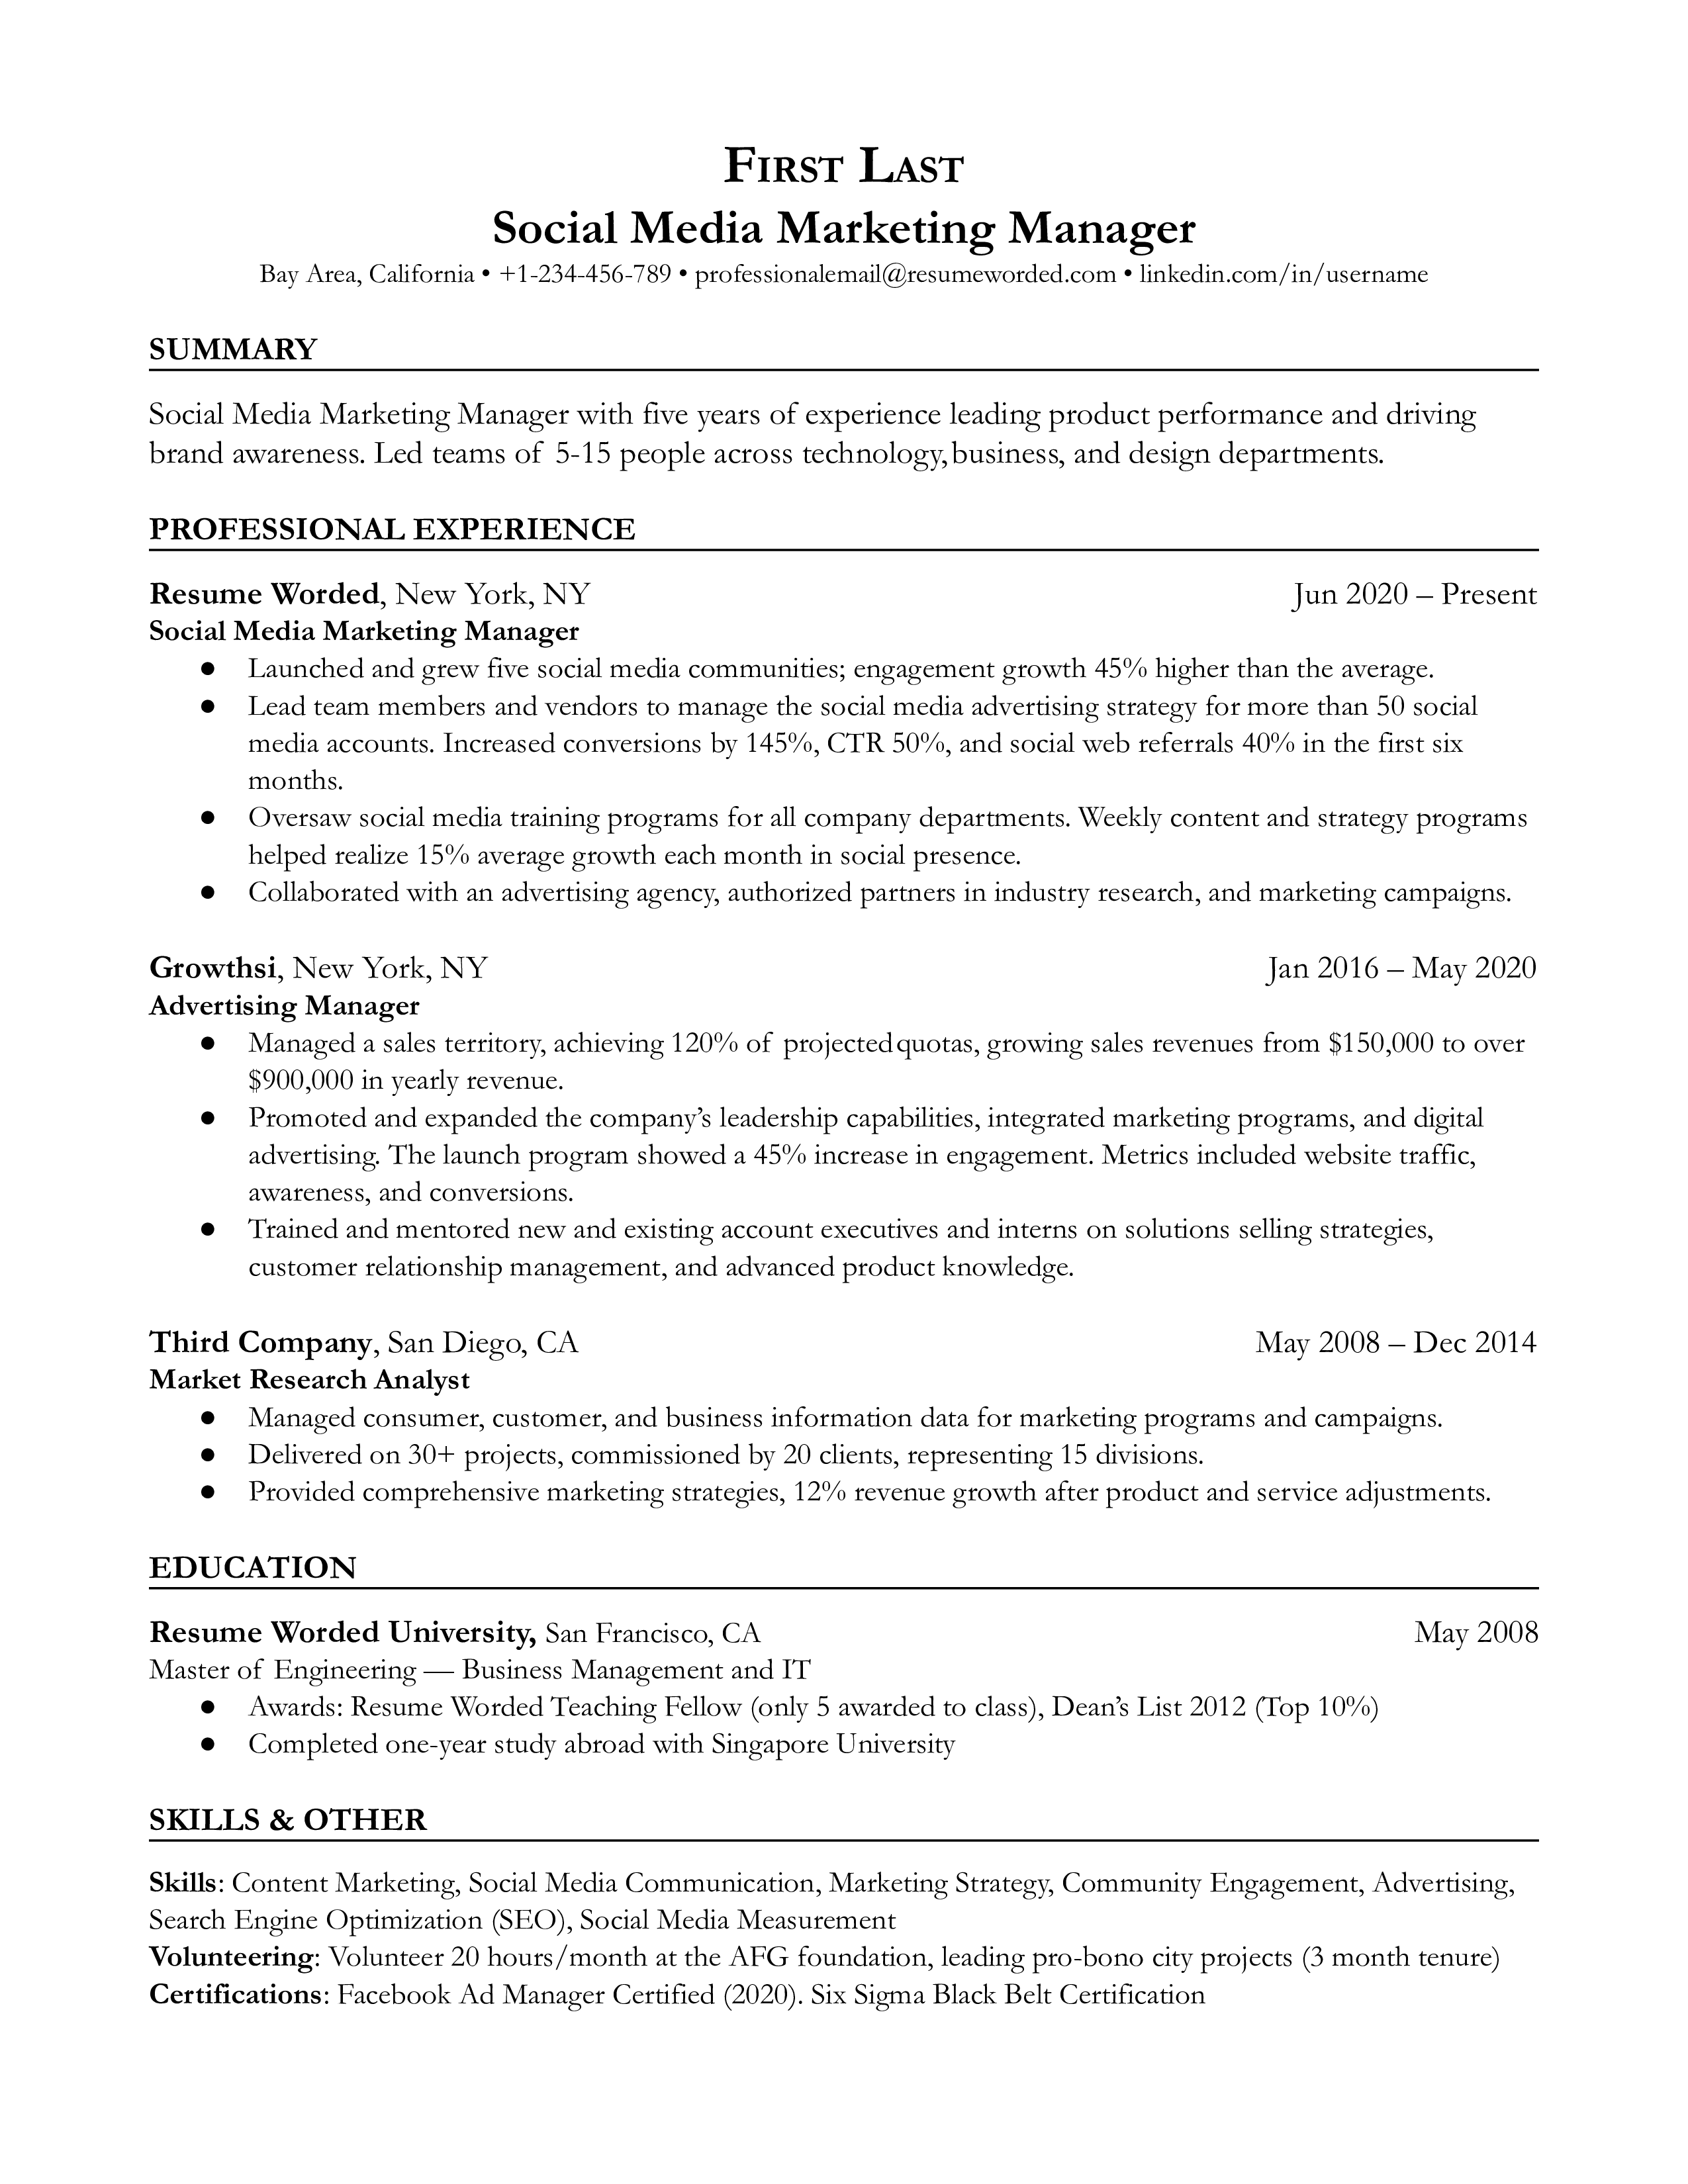 A resume for a social media marketing manager with a master's degree and experience as an advertising manager and market research analyst.